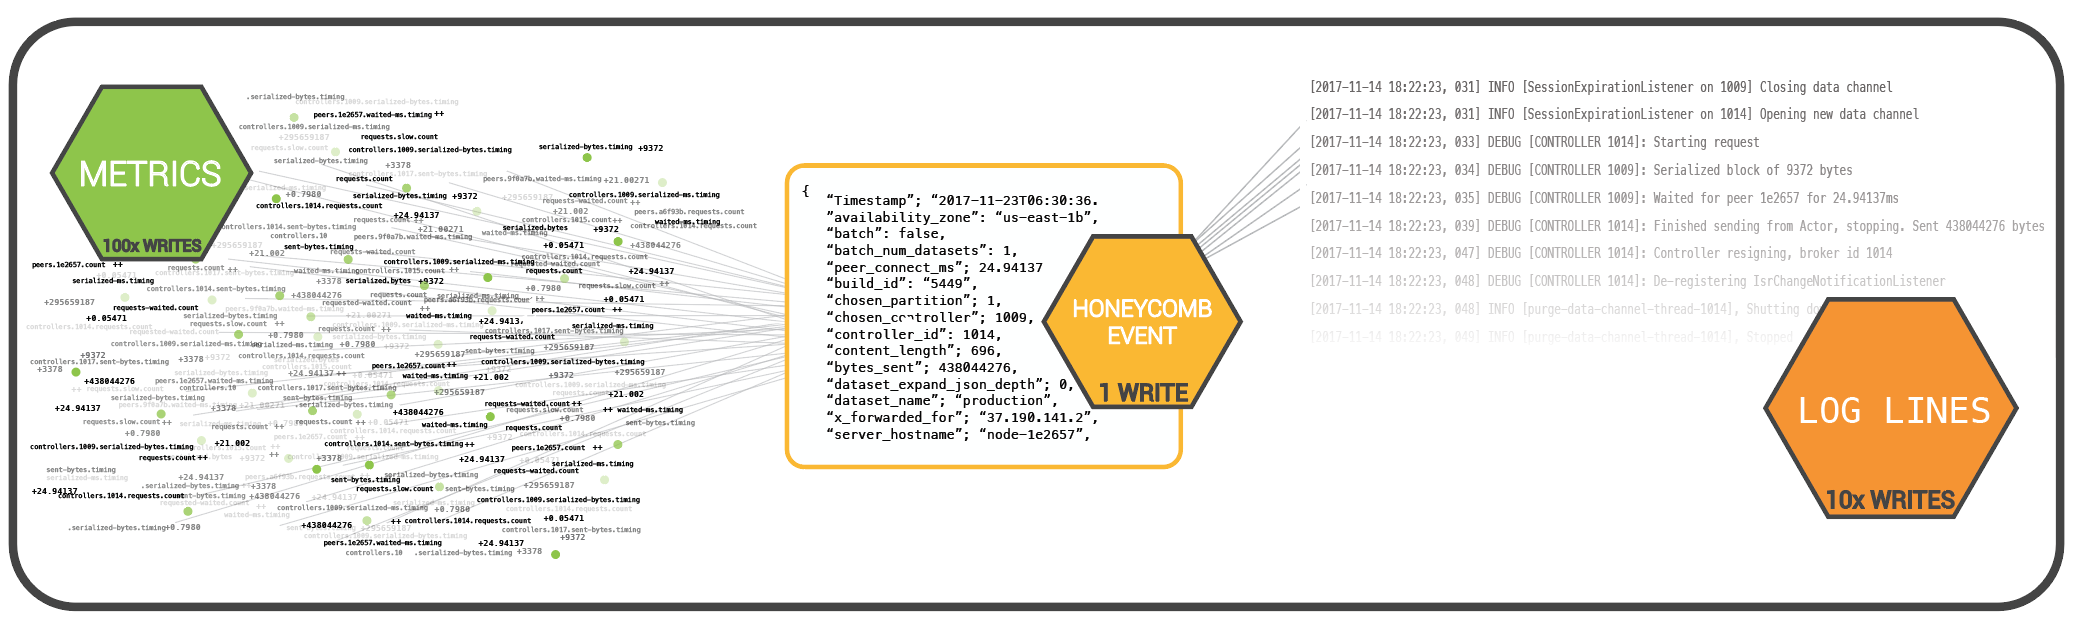 Every event in Honeycomb would take many log lines and a ton of metrics to represent.